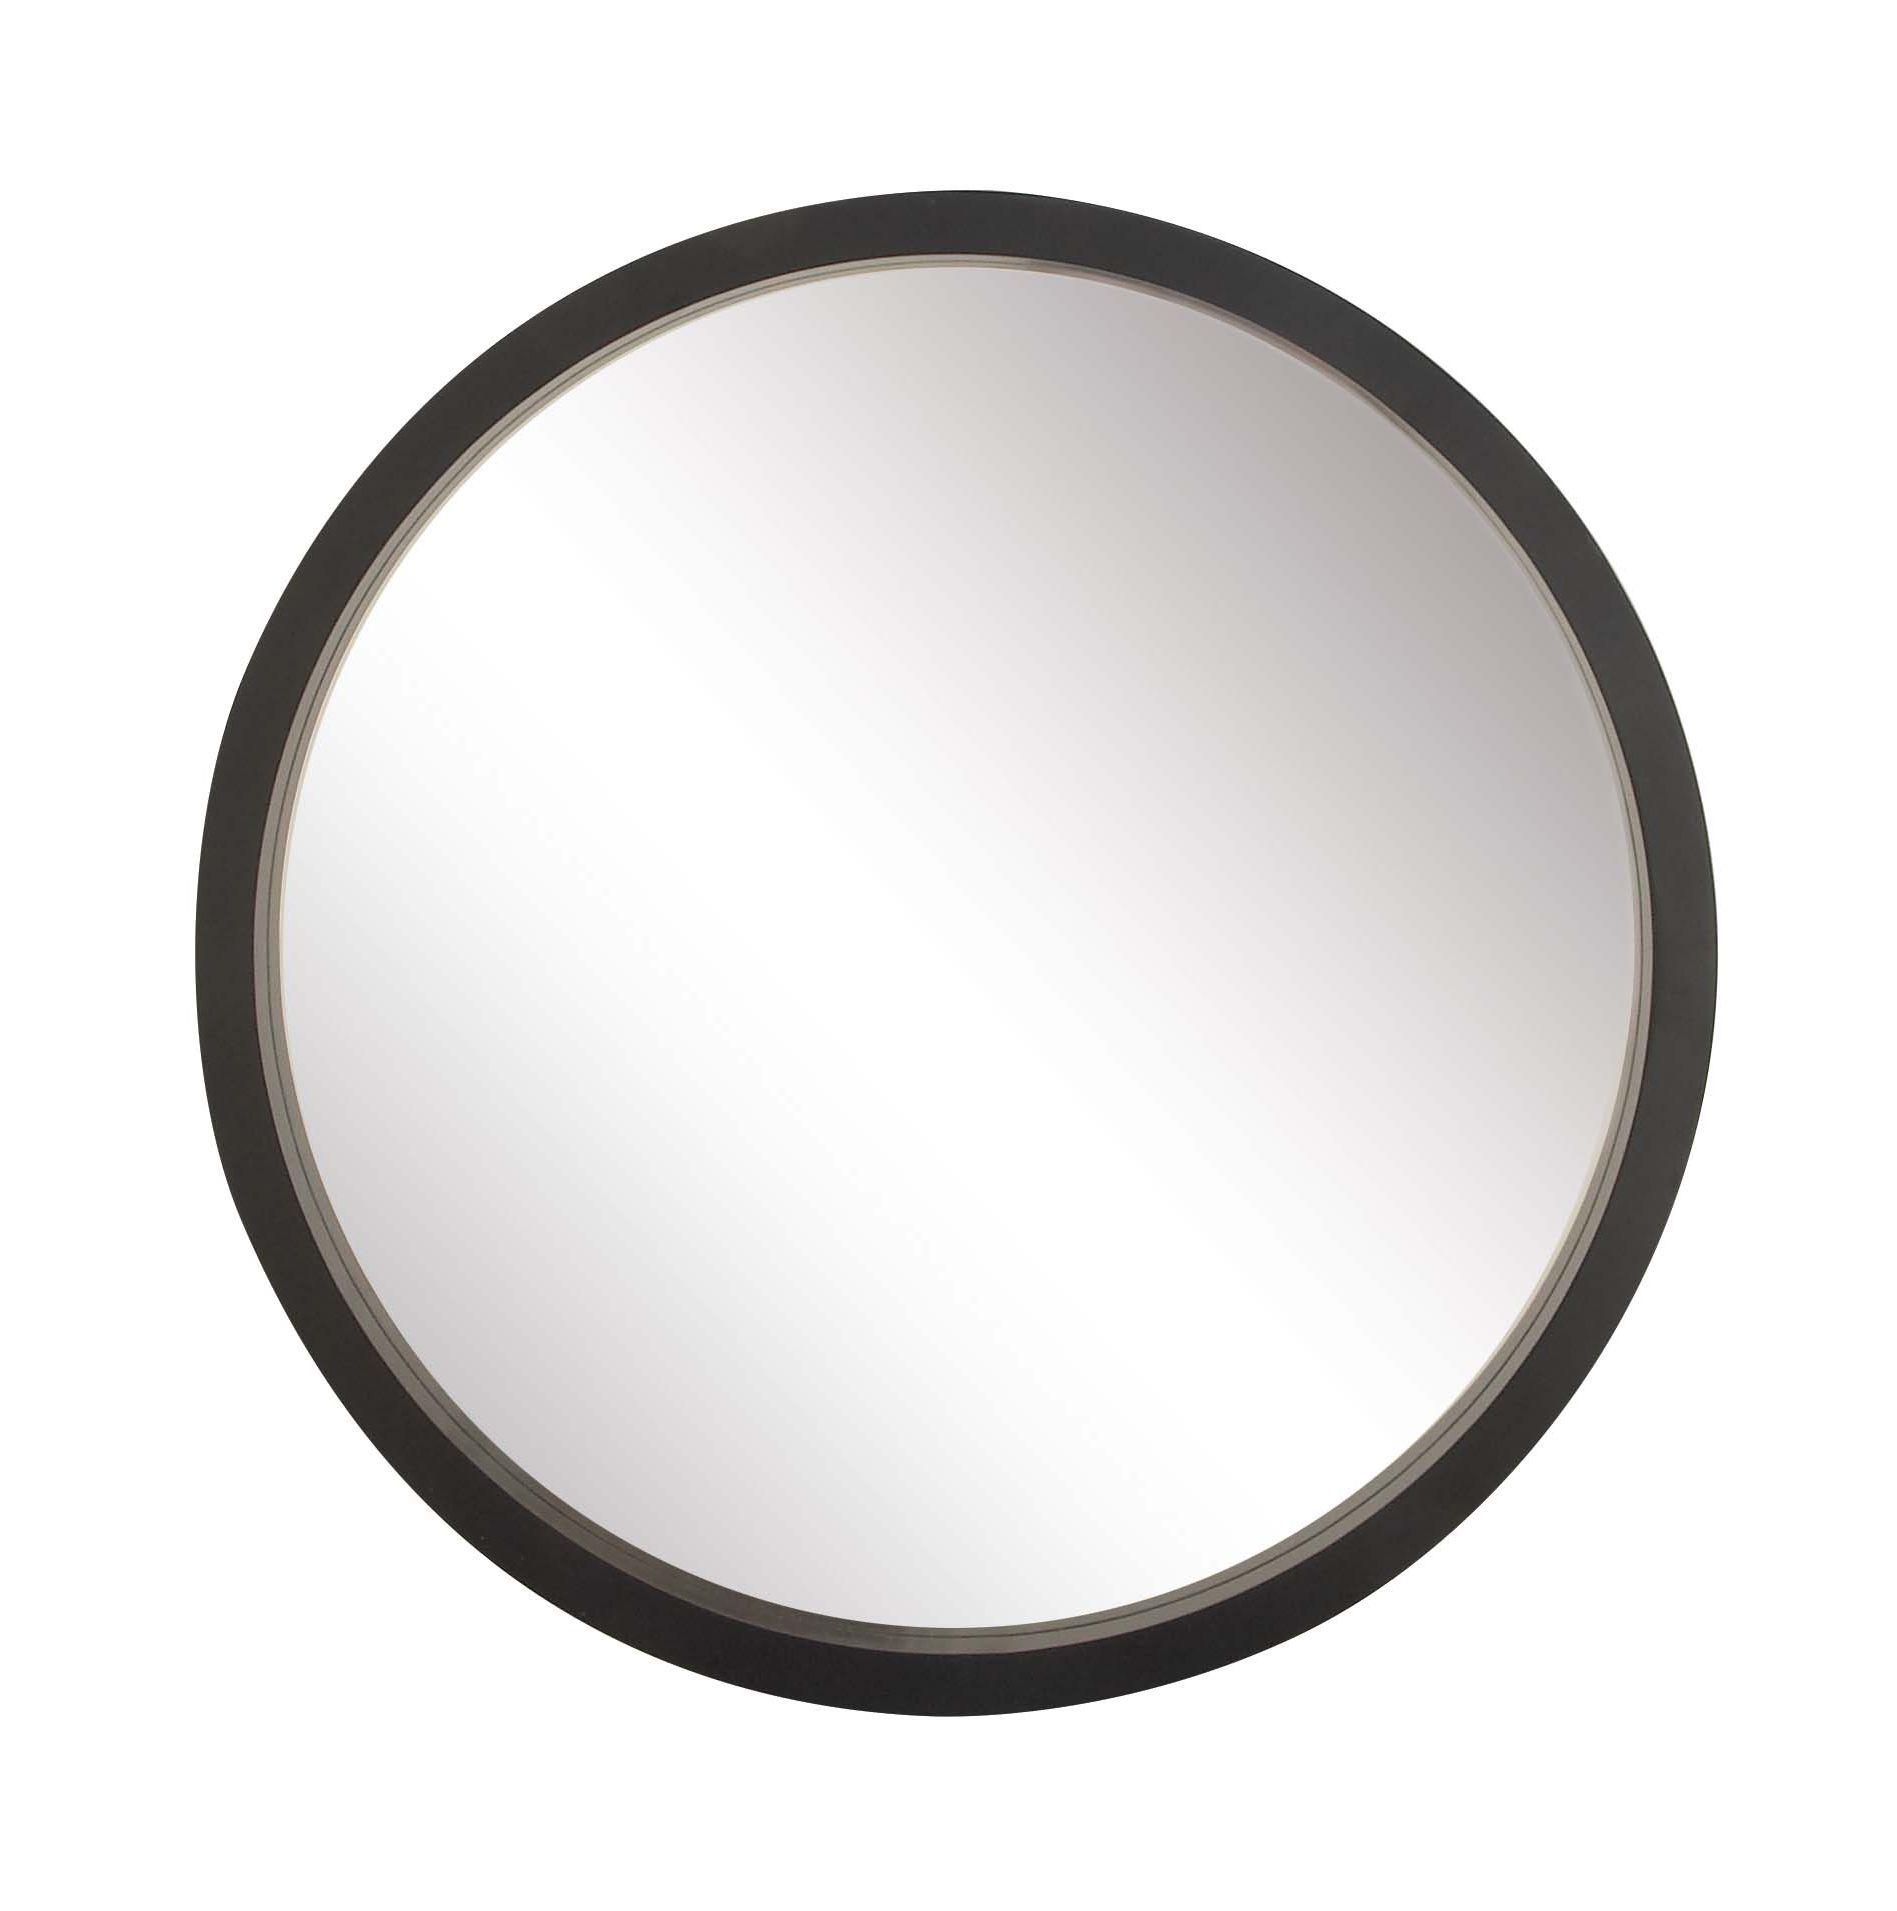 Decmode 32 Inch Contemporary Wooden Framed Round Wall Mirror, Black With Regard To Trendy Round 4 Section Wall Mirrors (View 3 of 15)